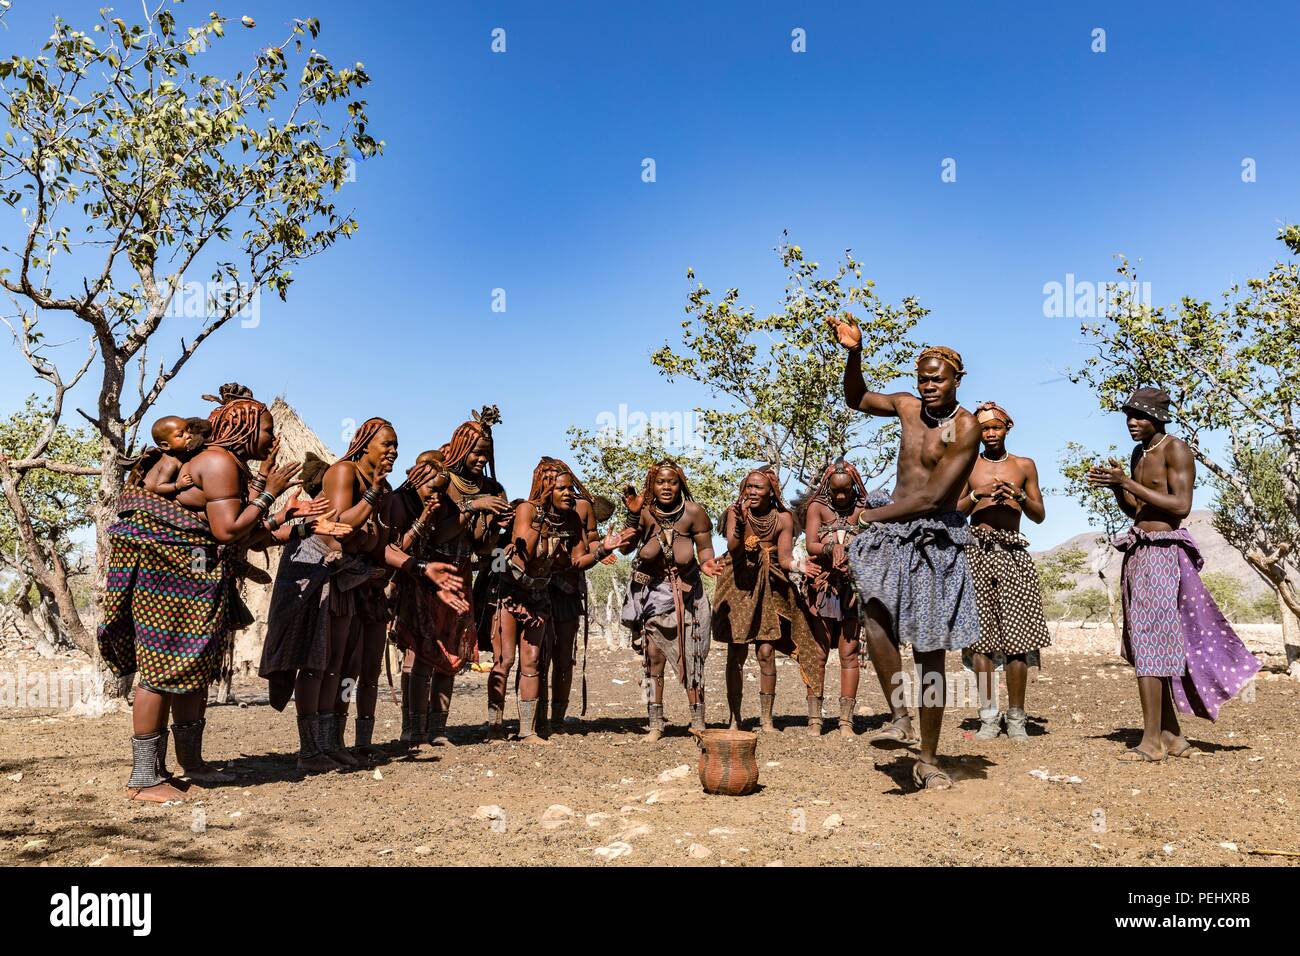 Himba tribes people performing a dance for visitors to their village Stock Photo